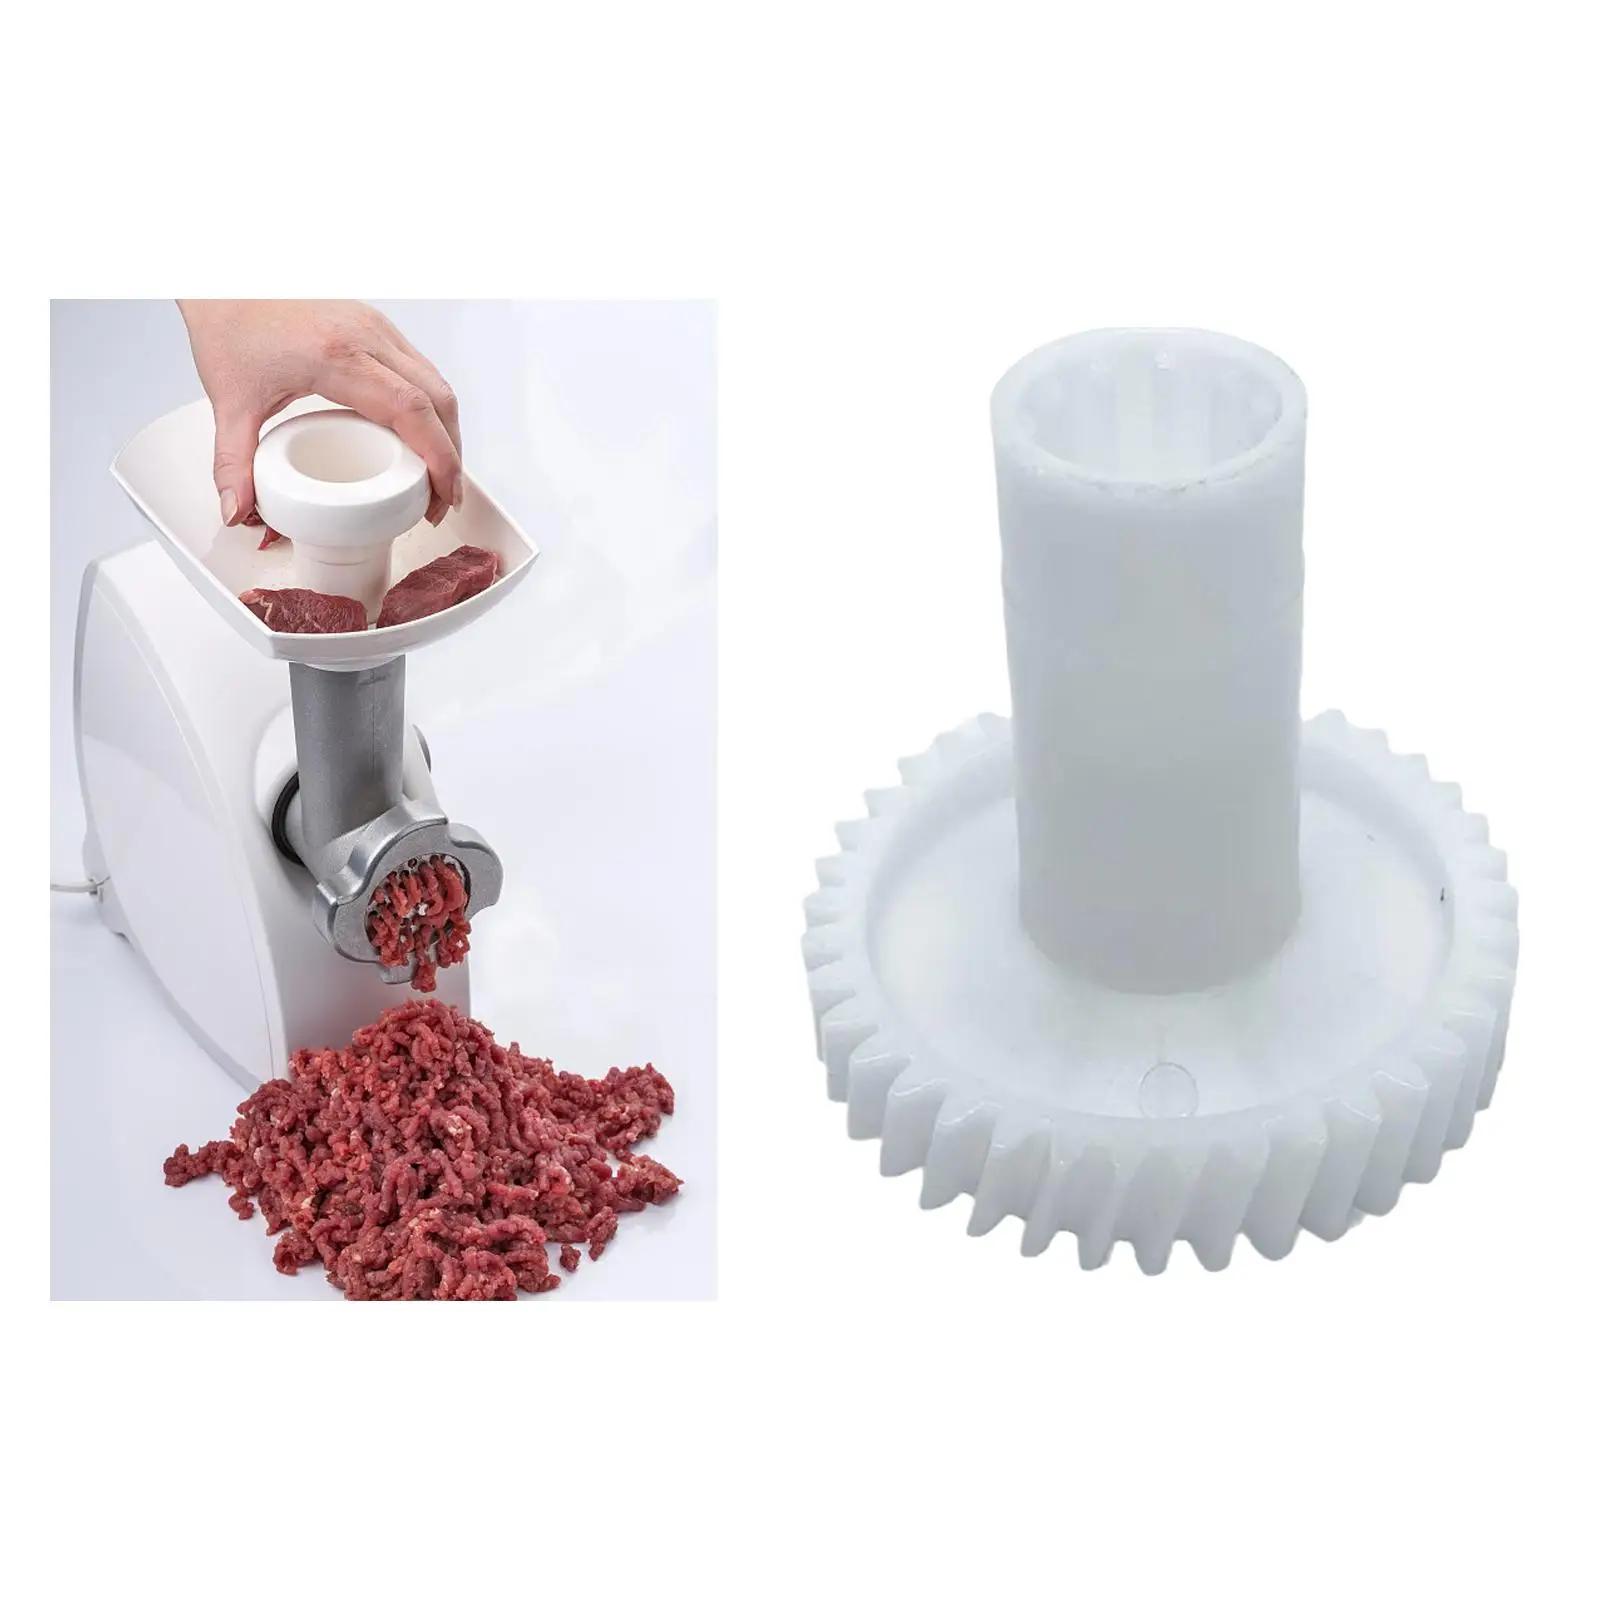 Meat Grinder Gear Spare Parts, Repair Part Household Meat Grinder, Mincer Gear Duable for 1707